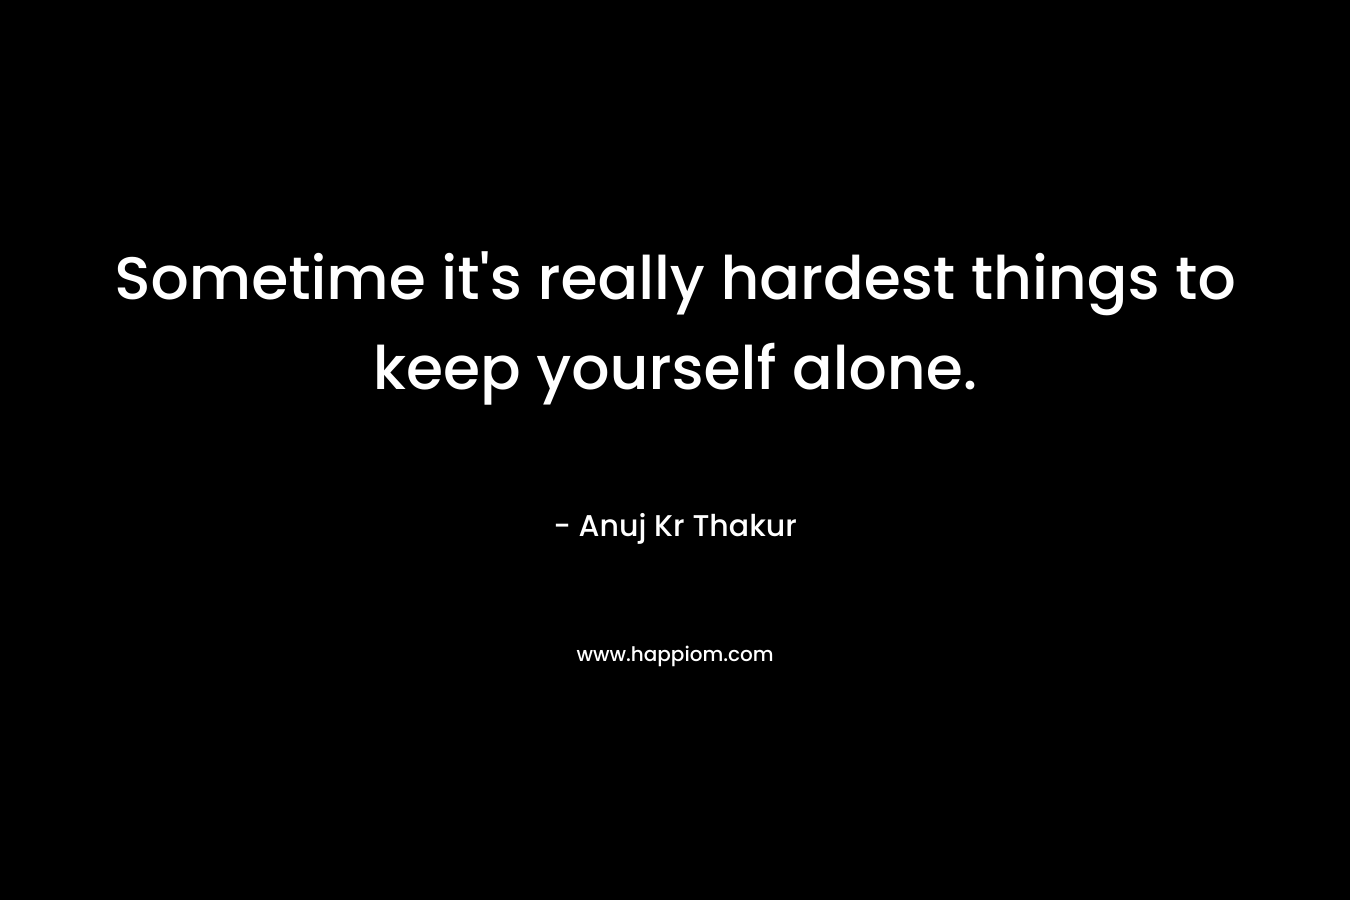 Sometime it's really hardest things to keep yourself alone.